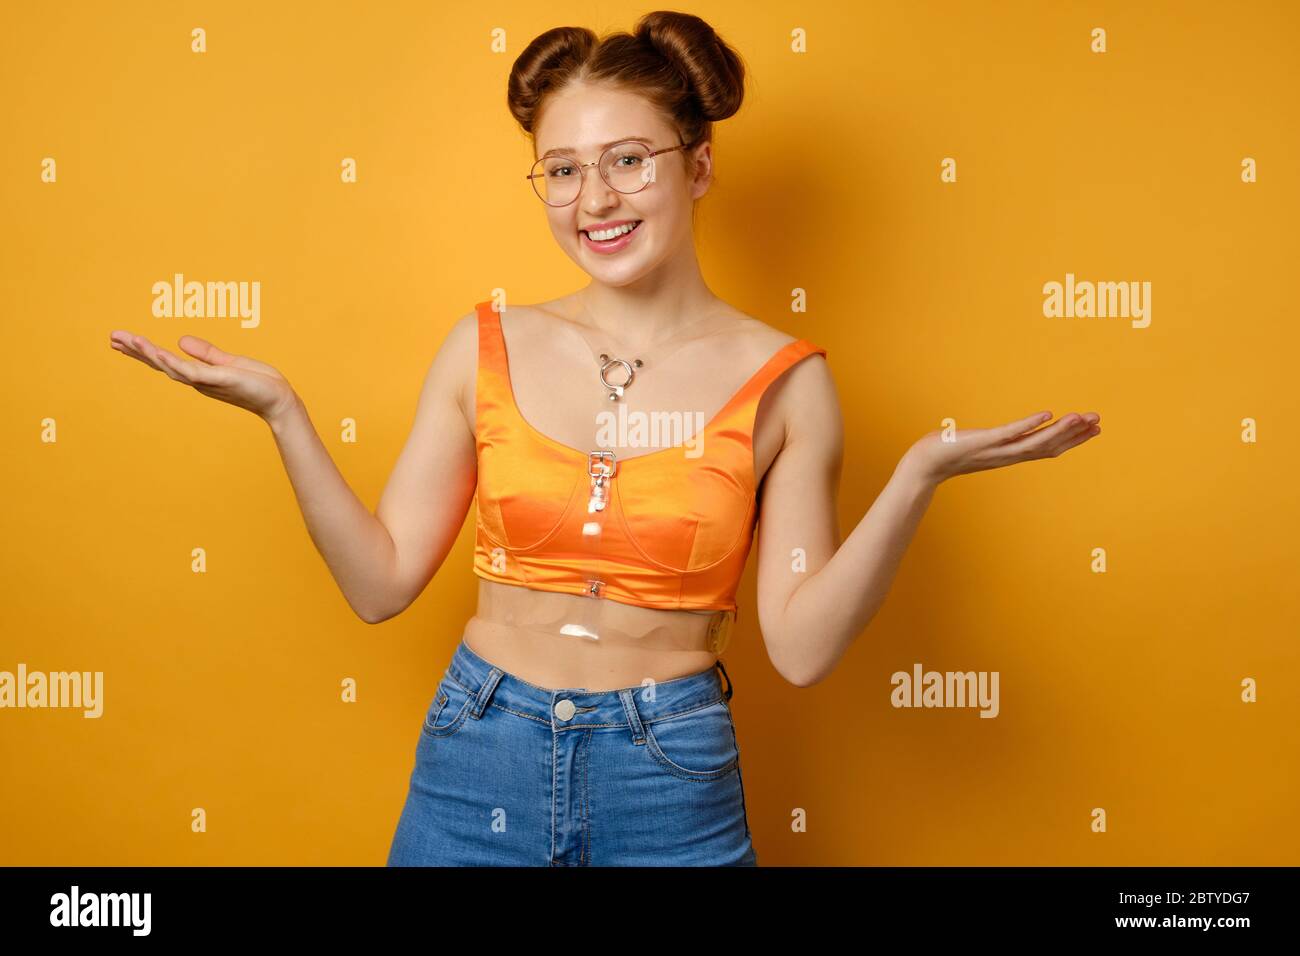 The girl with two beams, glasses and an orange top stands on a yellow background and smiles, spreading her palms to the sides Stock Photo